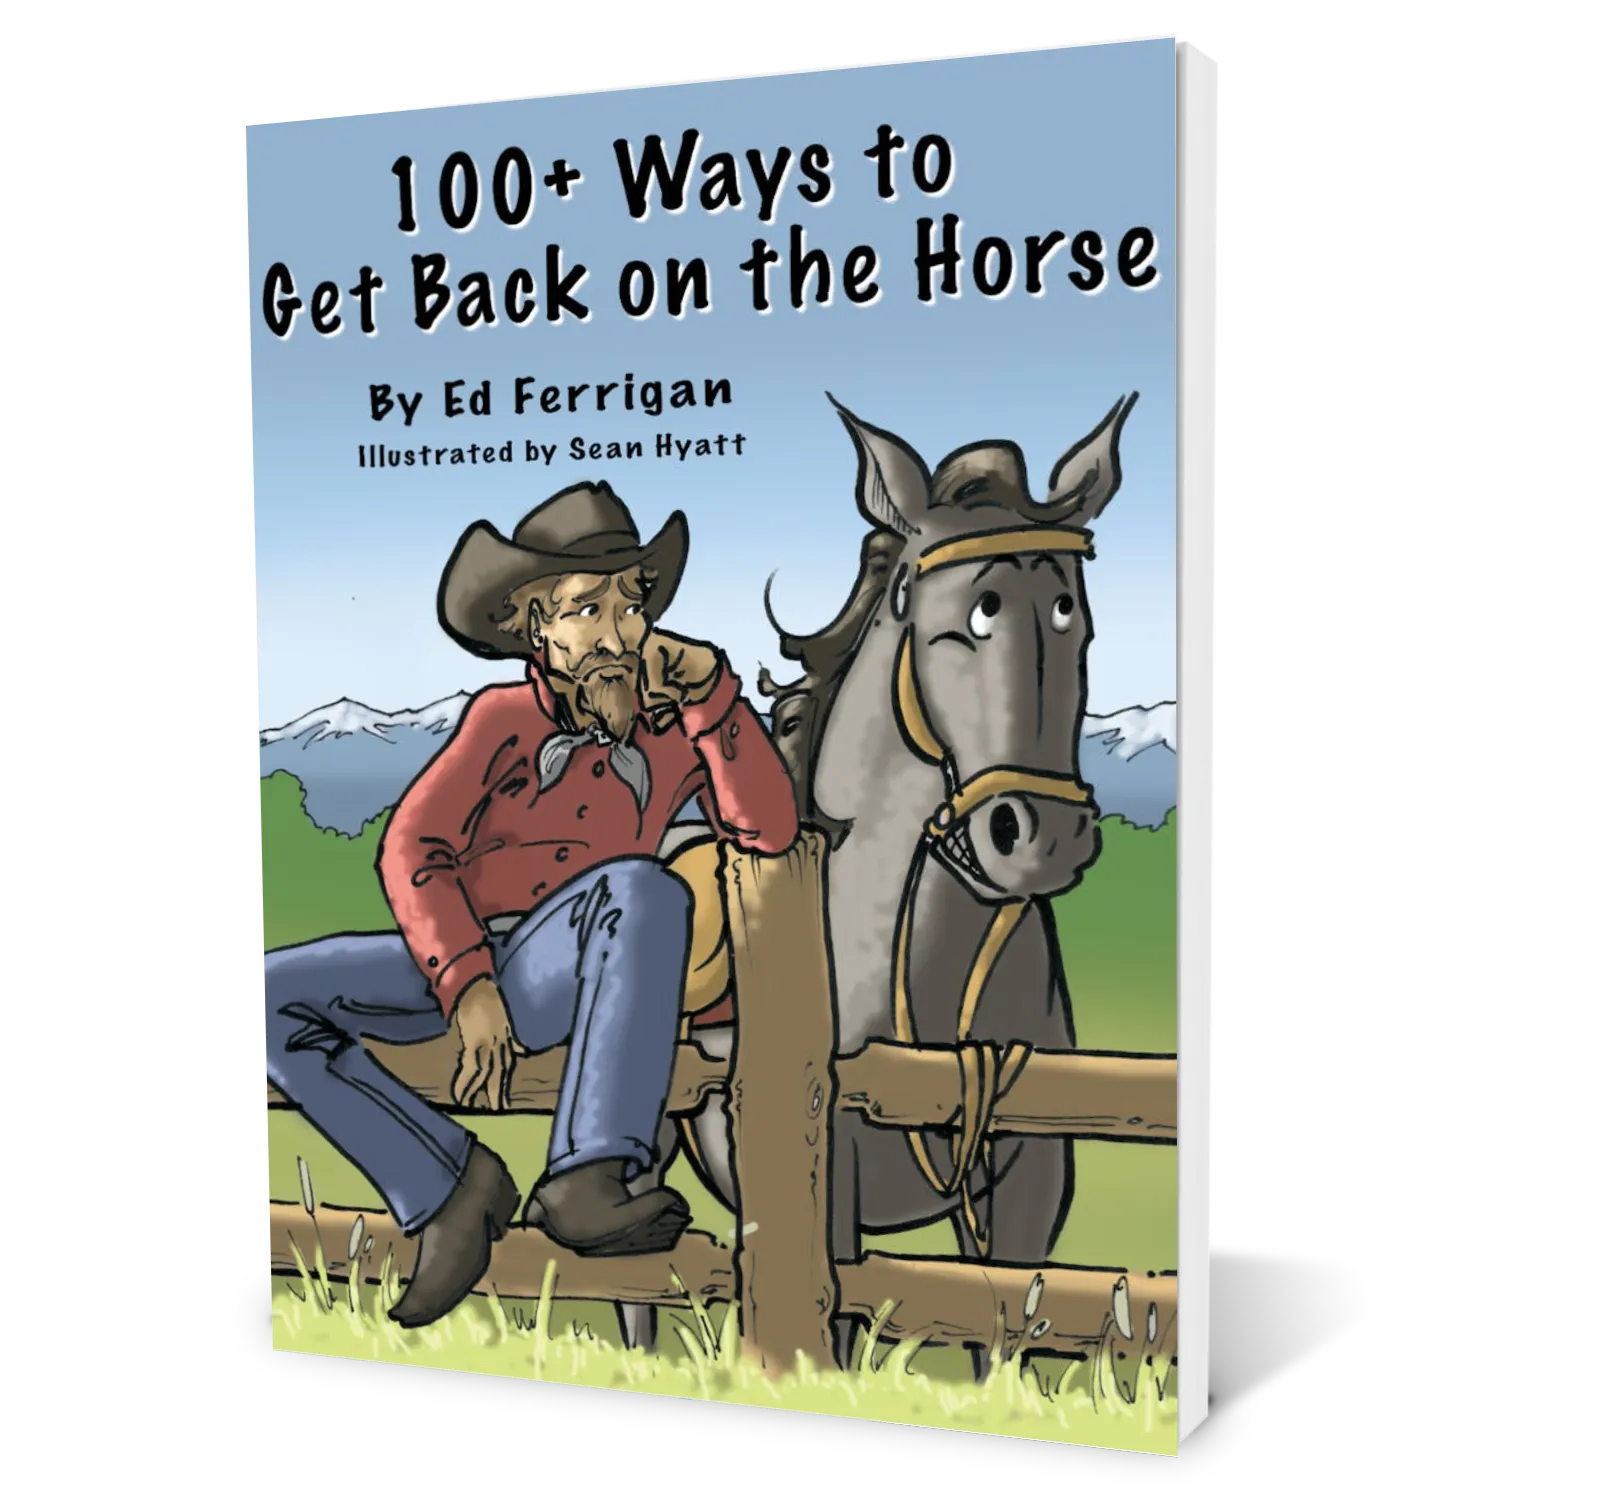 100+ ways to get back on the horse by Ed Ferrigan